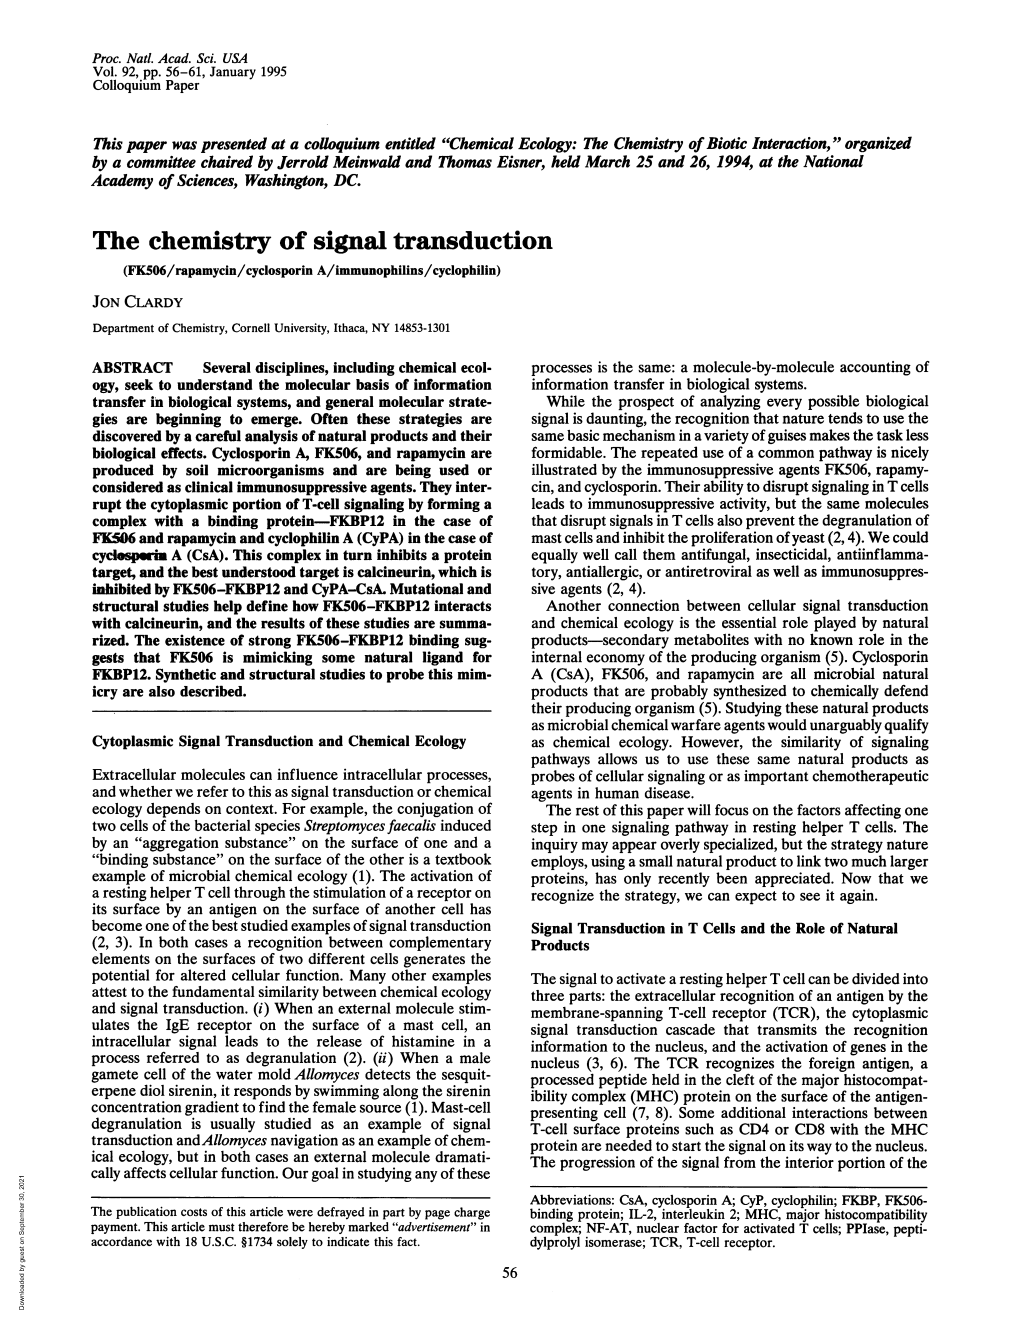 The Chemistry of Signal Transduction